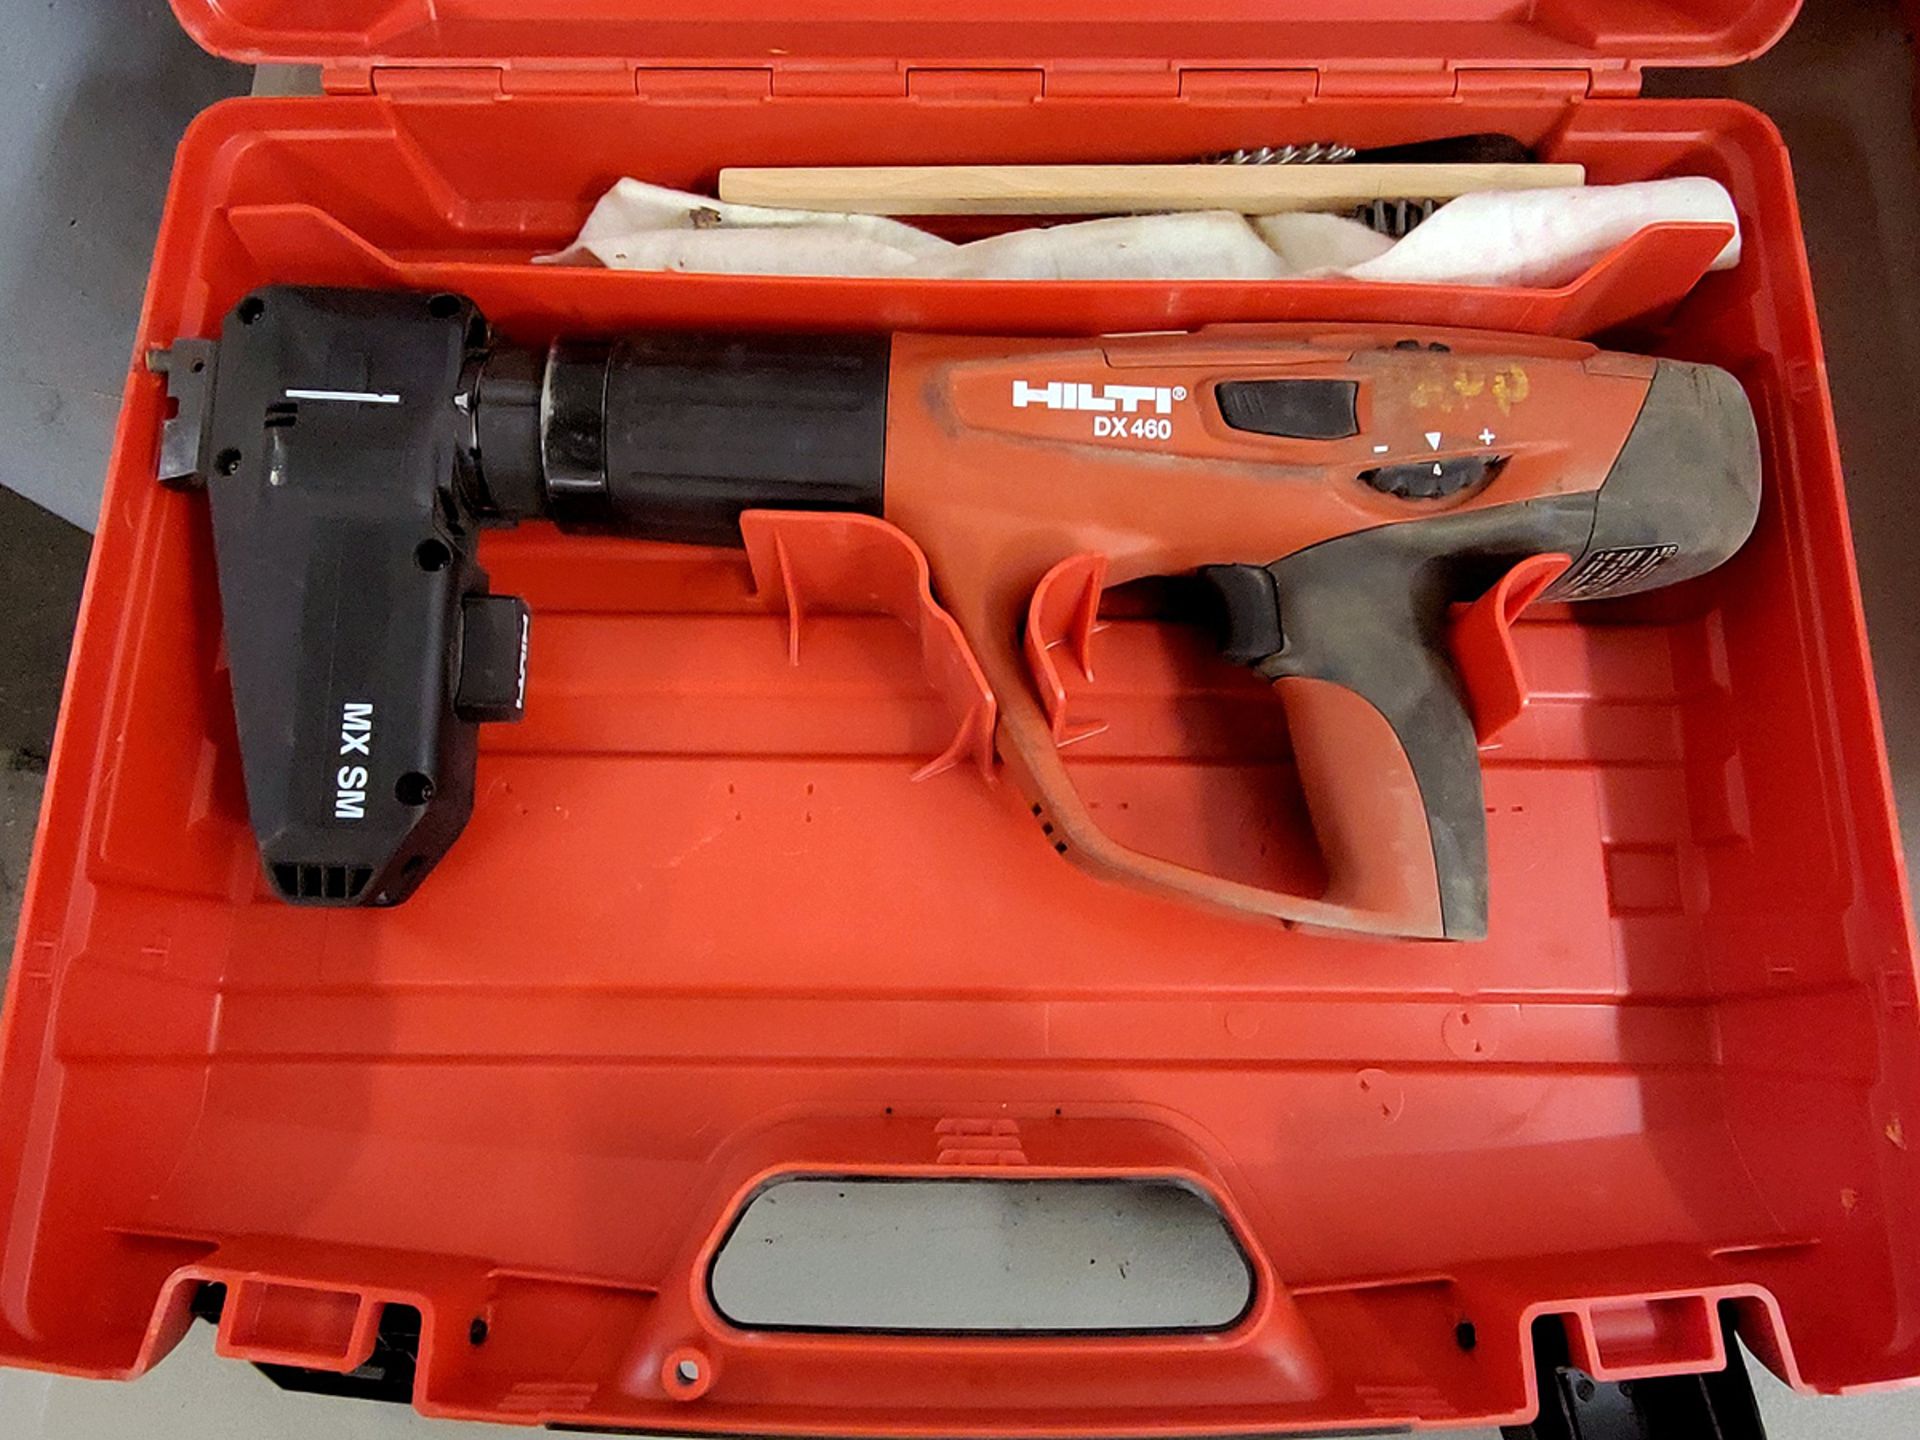 Hilti DX460 Automatic Power Actuated Fastening Tool